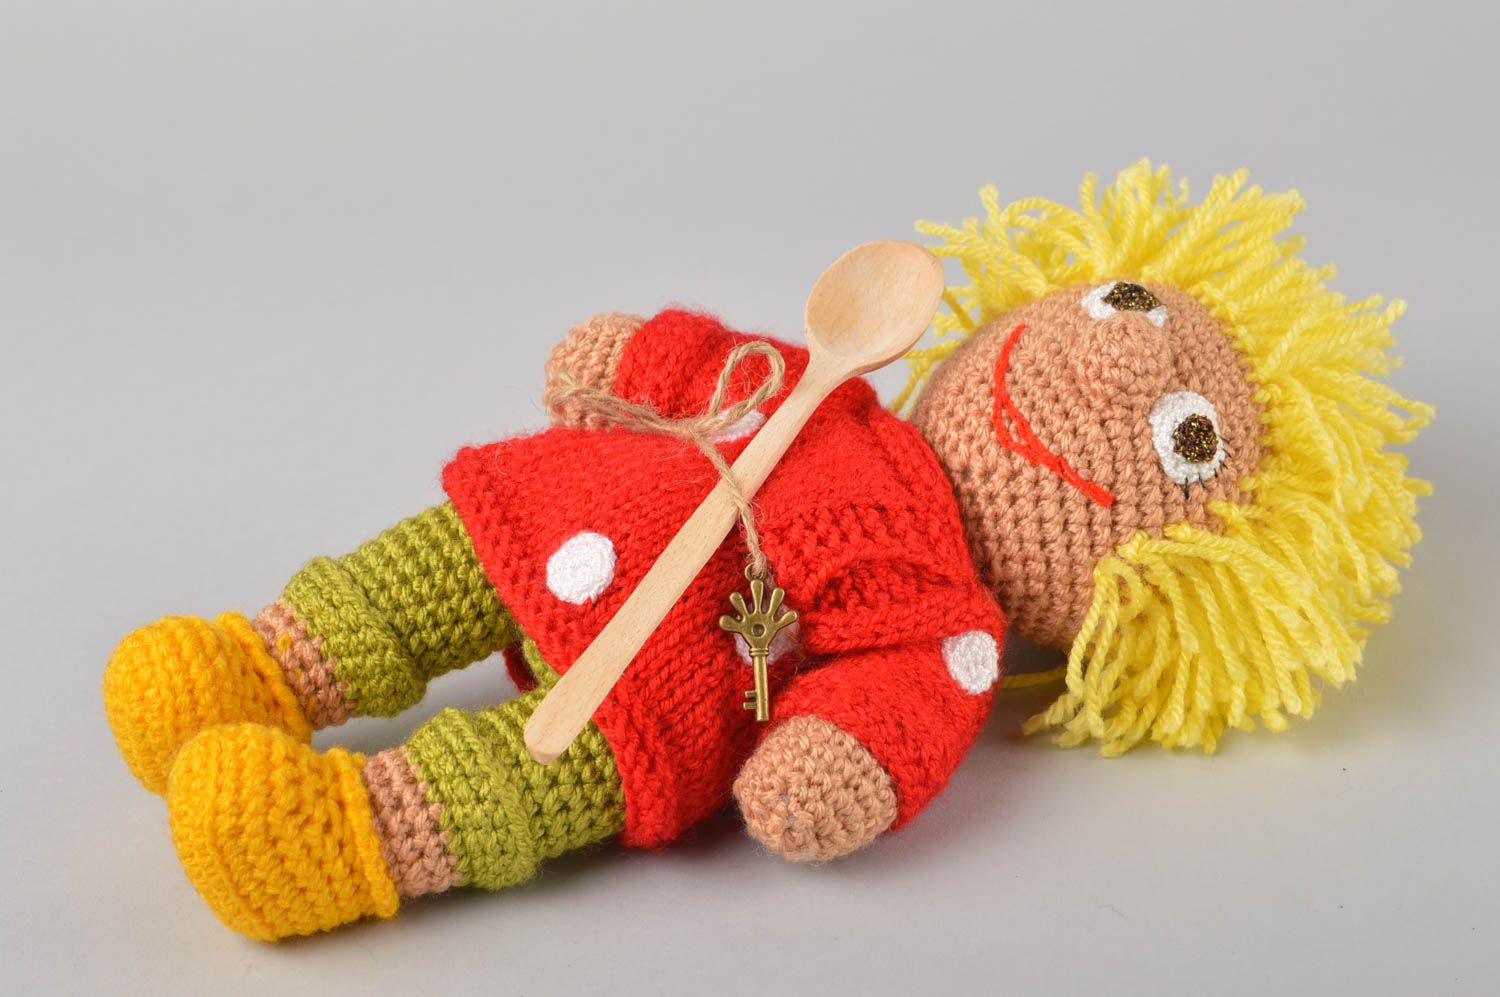 Handmade toy crocheted toy designer toy unusual gift for baby nursery decor photo 4